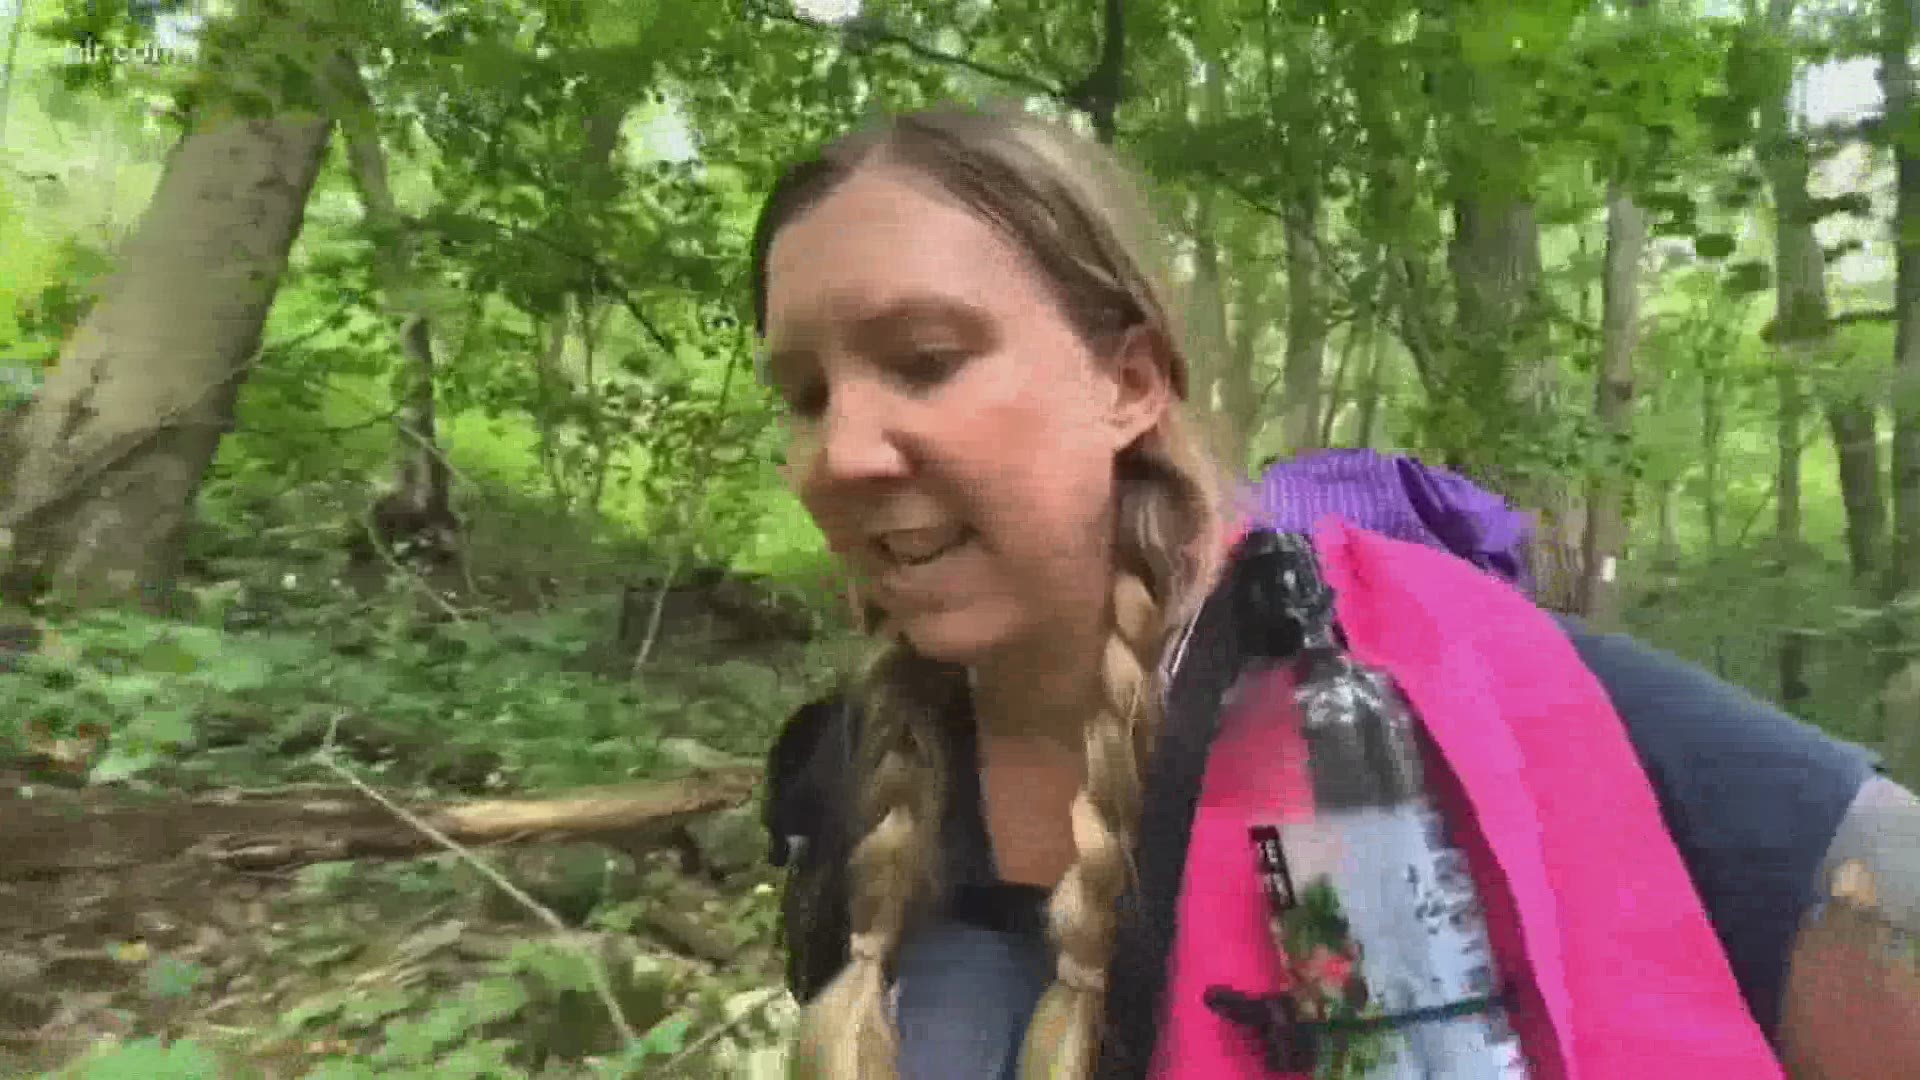 Gretchen Pardon has hiked more than 600 miles on the Appalachian Trail. Follow her on Instgram & YouTube (@hikingwithbraids). June 29, 2020-4pm.